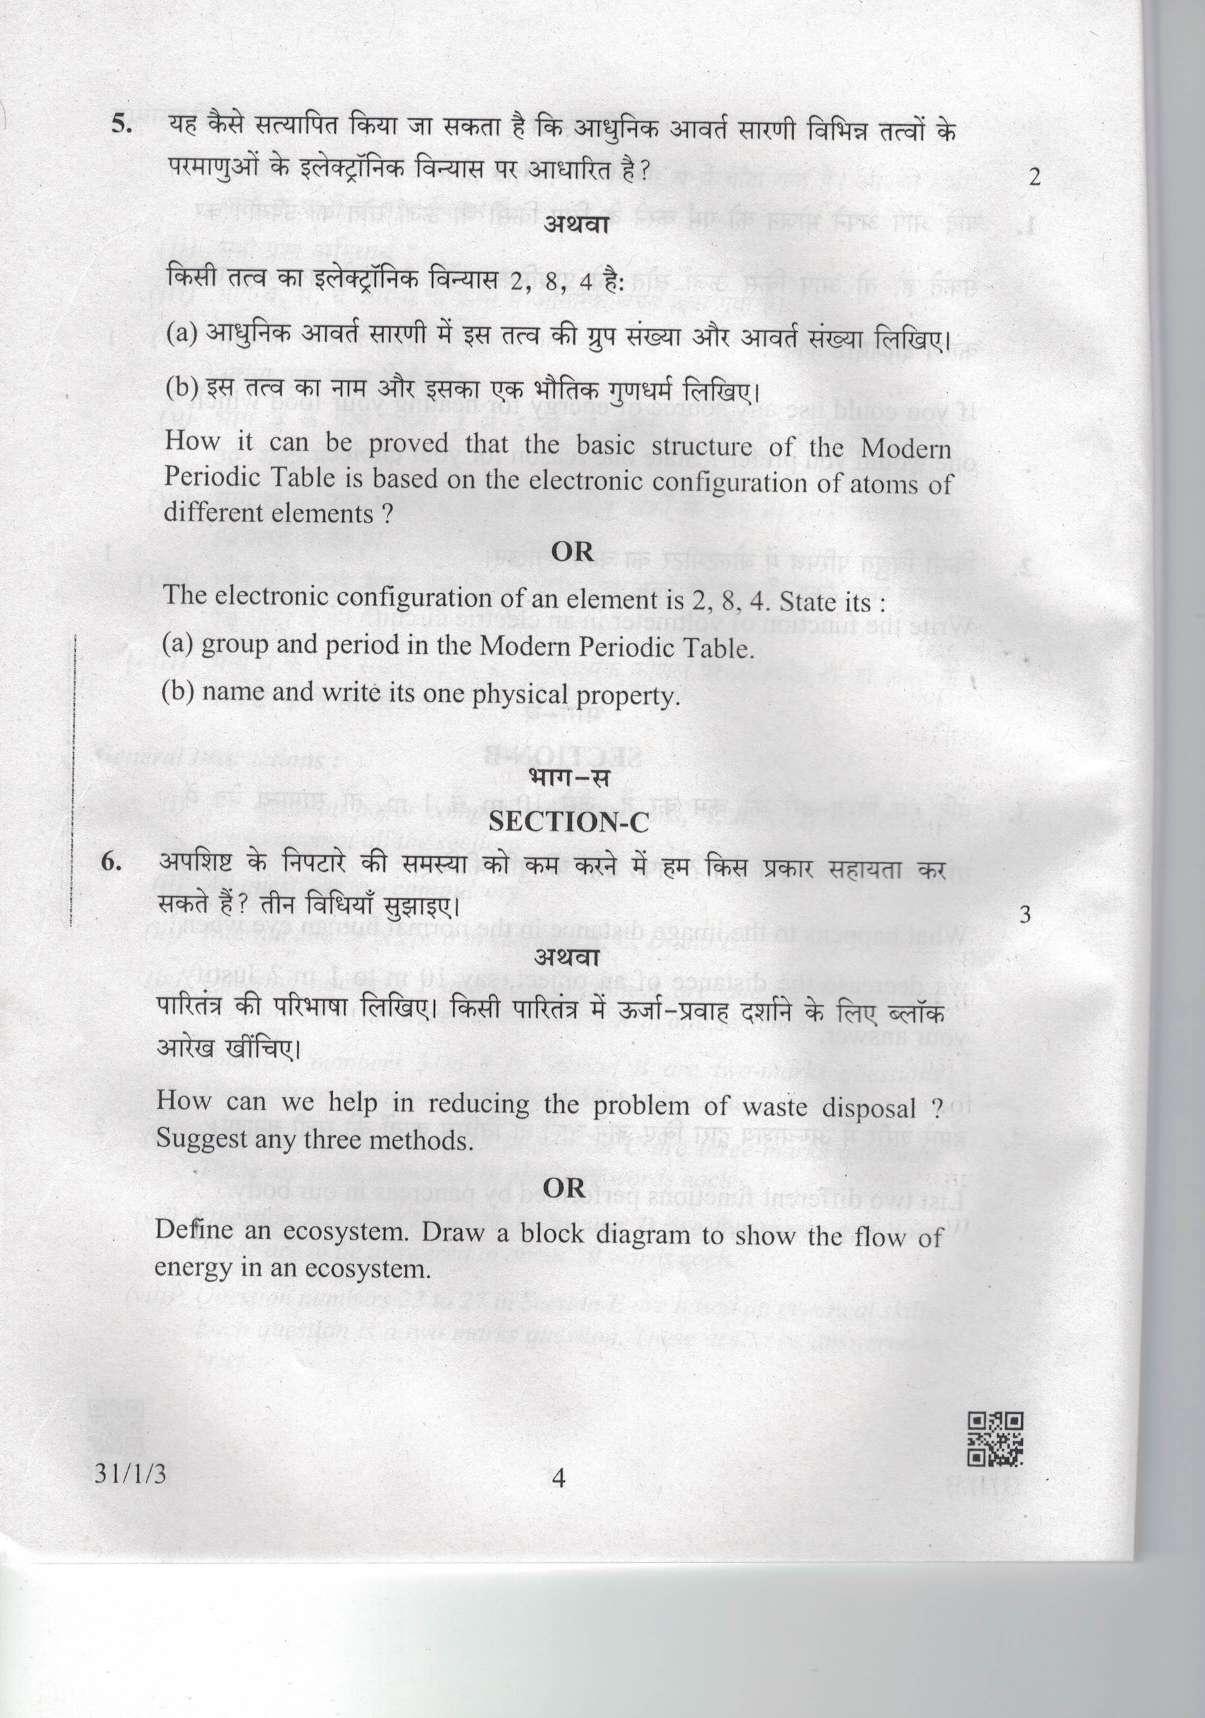 CBSE Class 10 31-1-3 Science 2019 Question Paper - Page 4